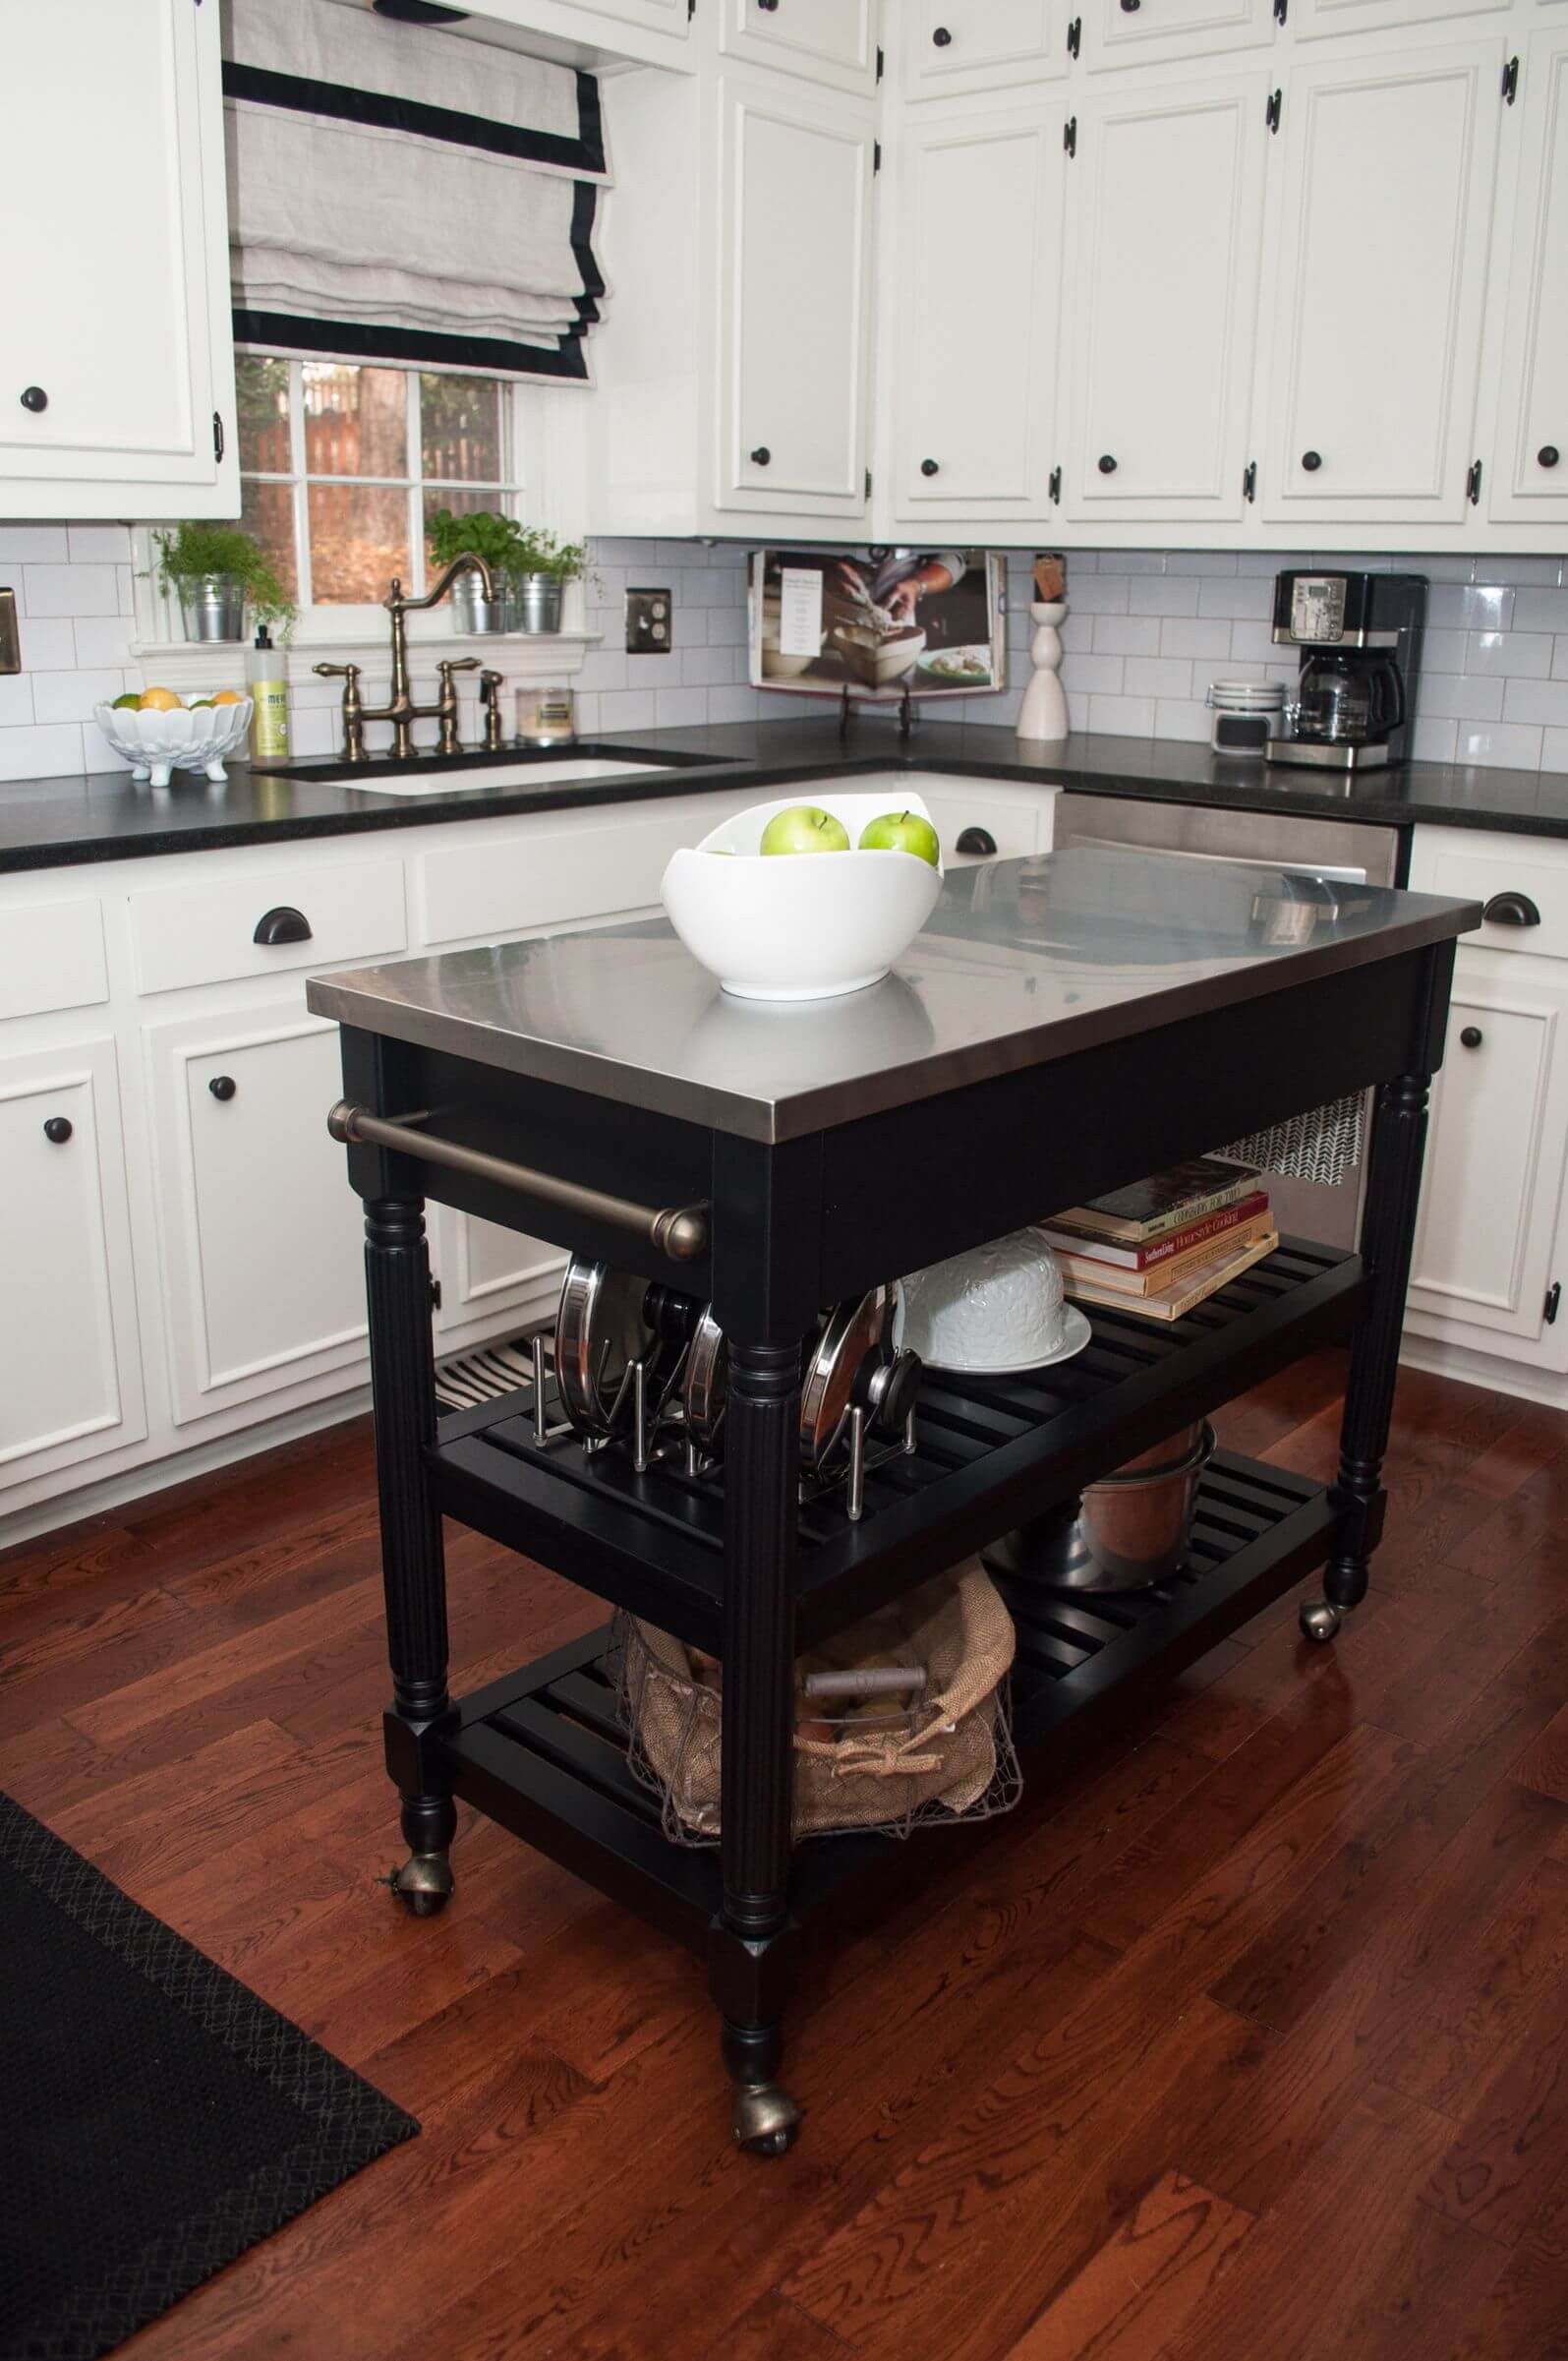 Small Mobile Kitchen Island
 10 Types of Small Kitchen Islands on Wheels